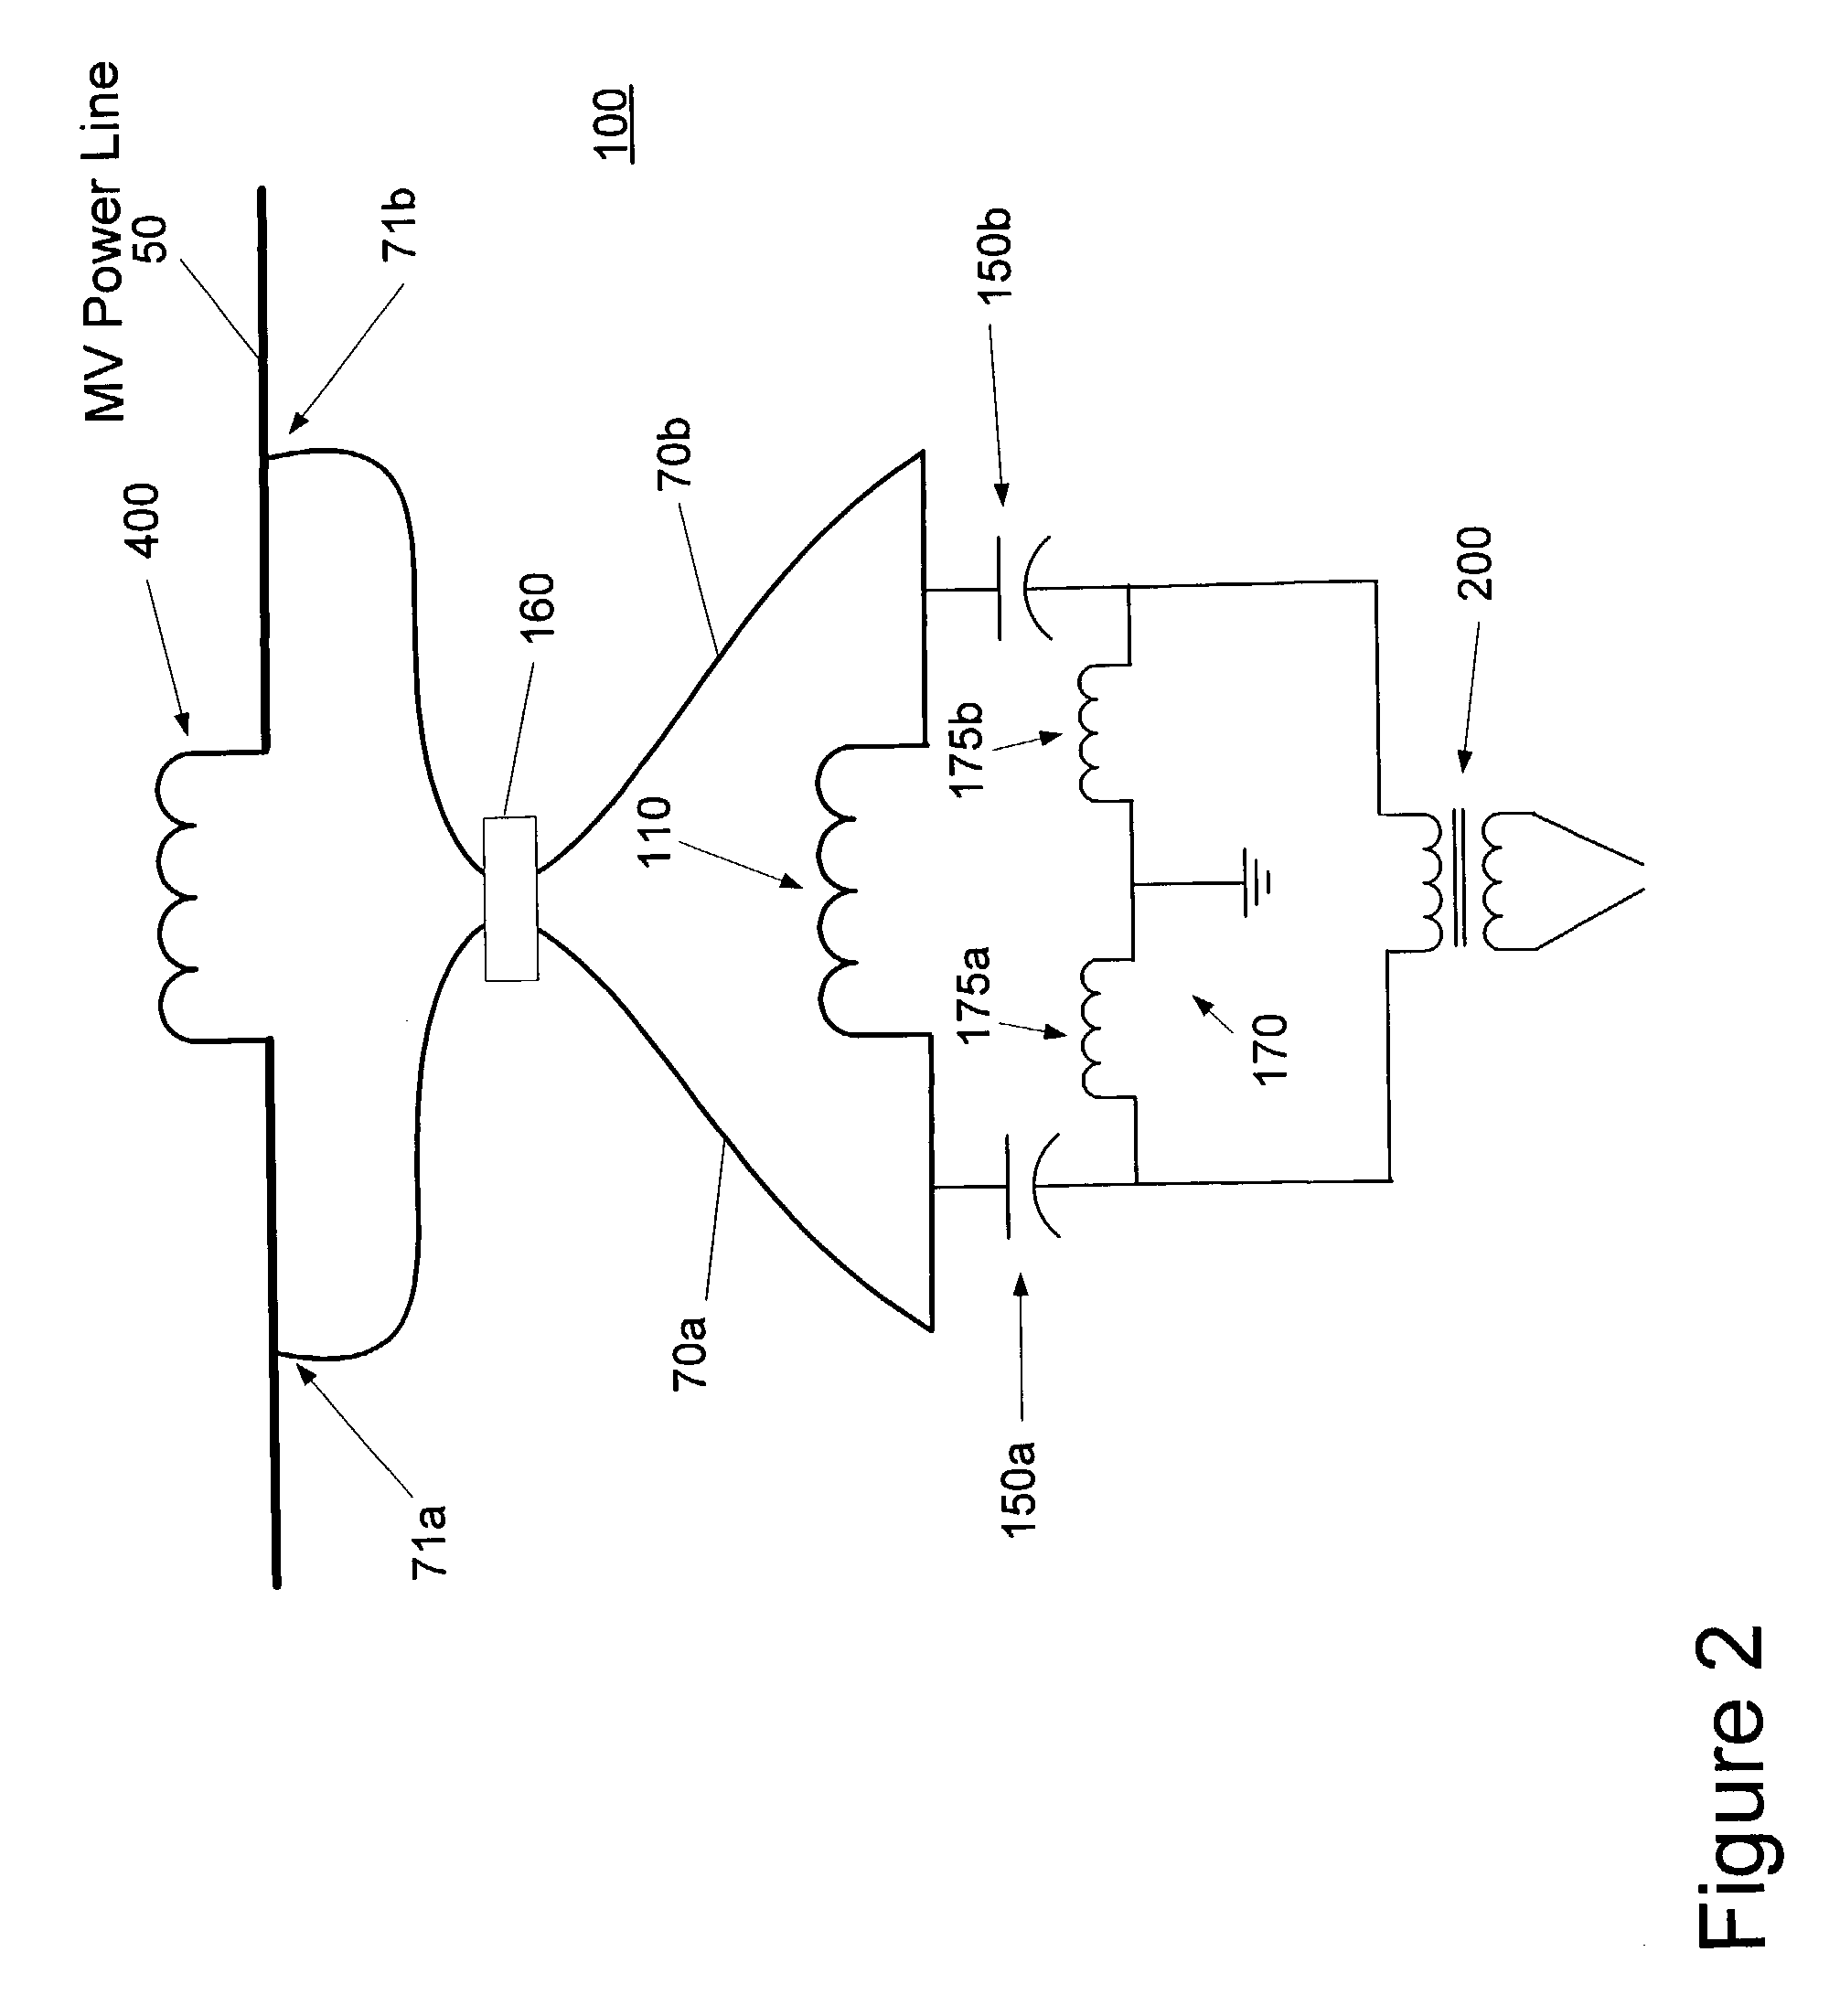 Power line coupling device and method of using the same